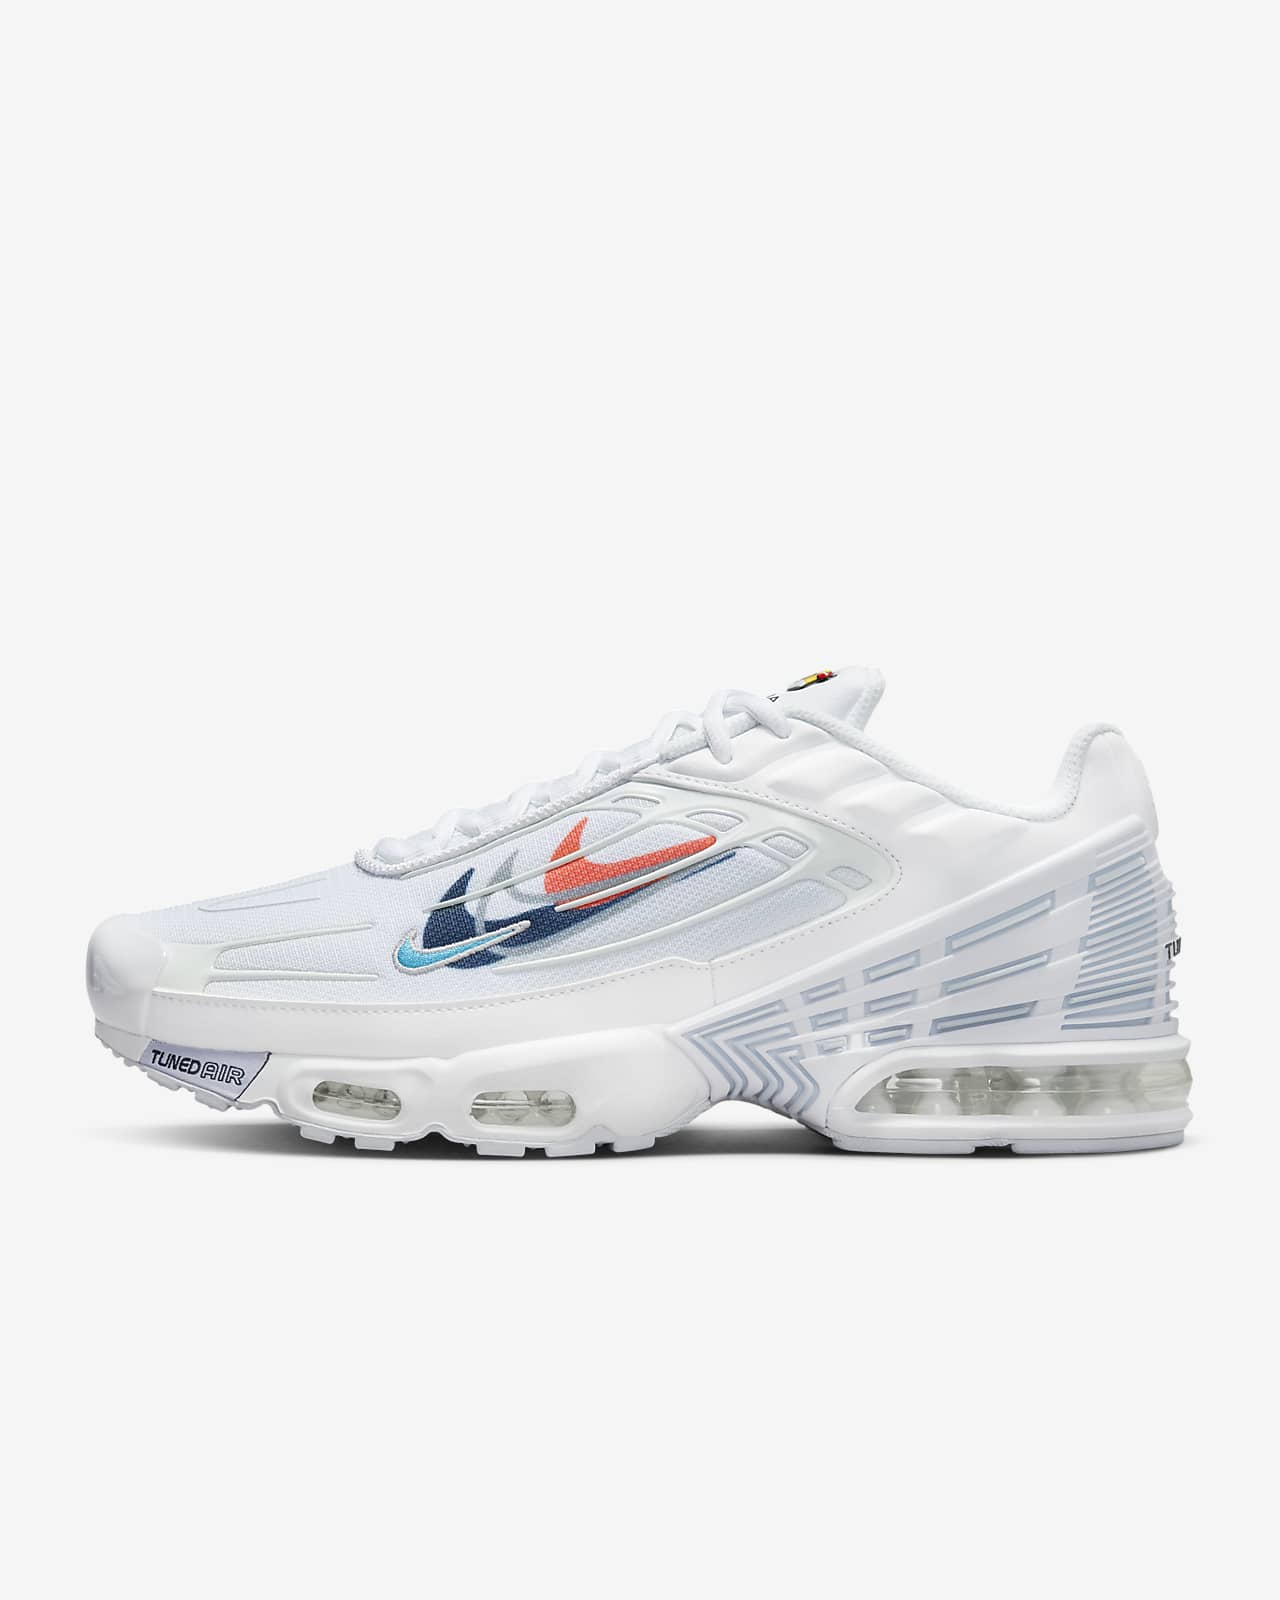 Reusachtig Blind honing Chaussure Nike Air Max Plus 3 pour homme. Nike CA